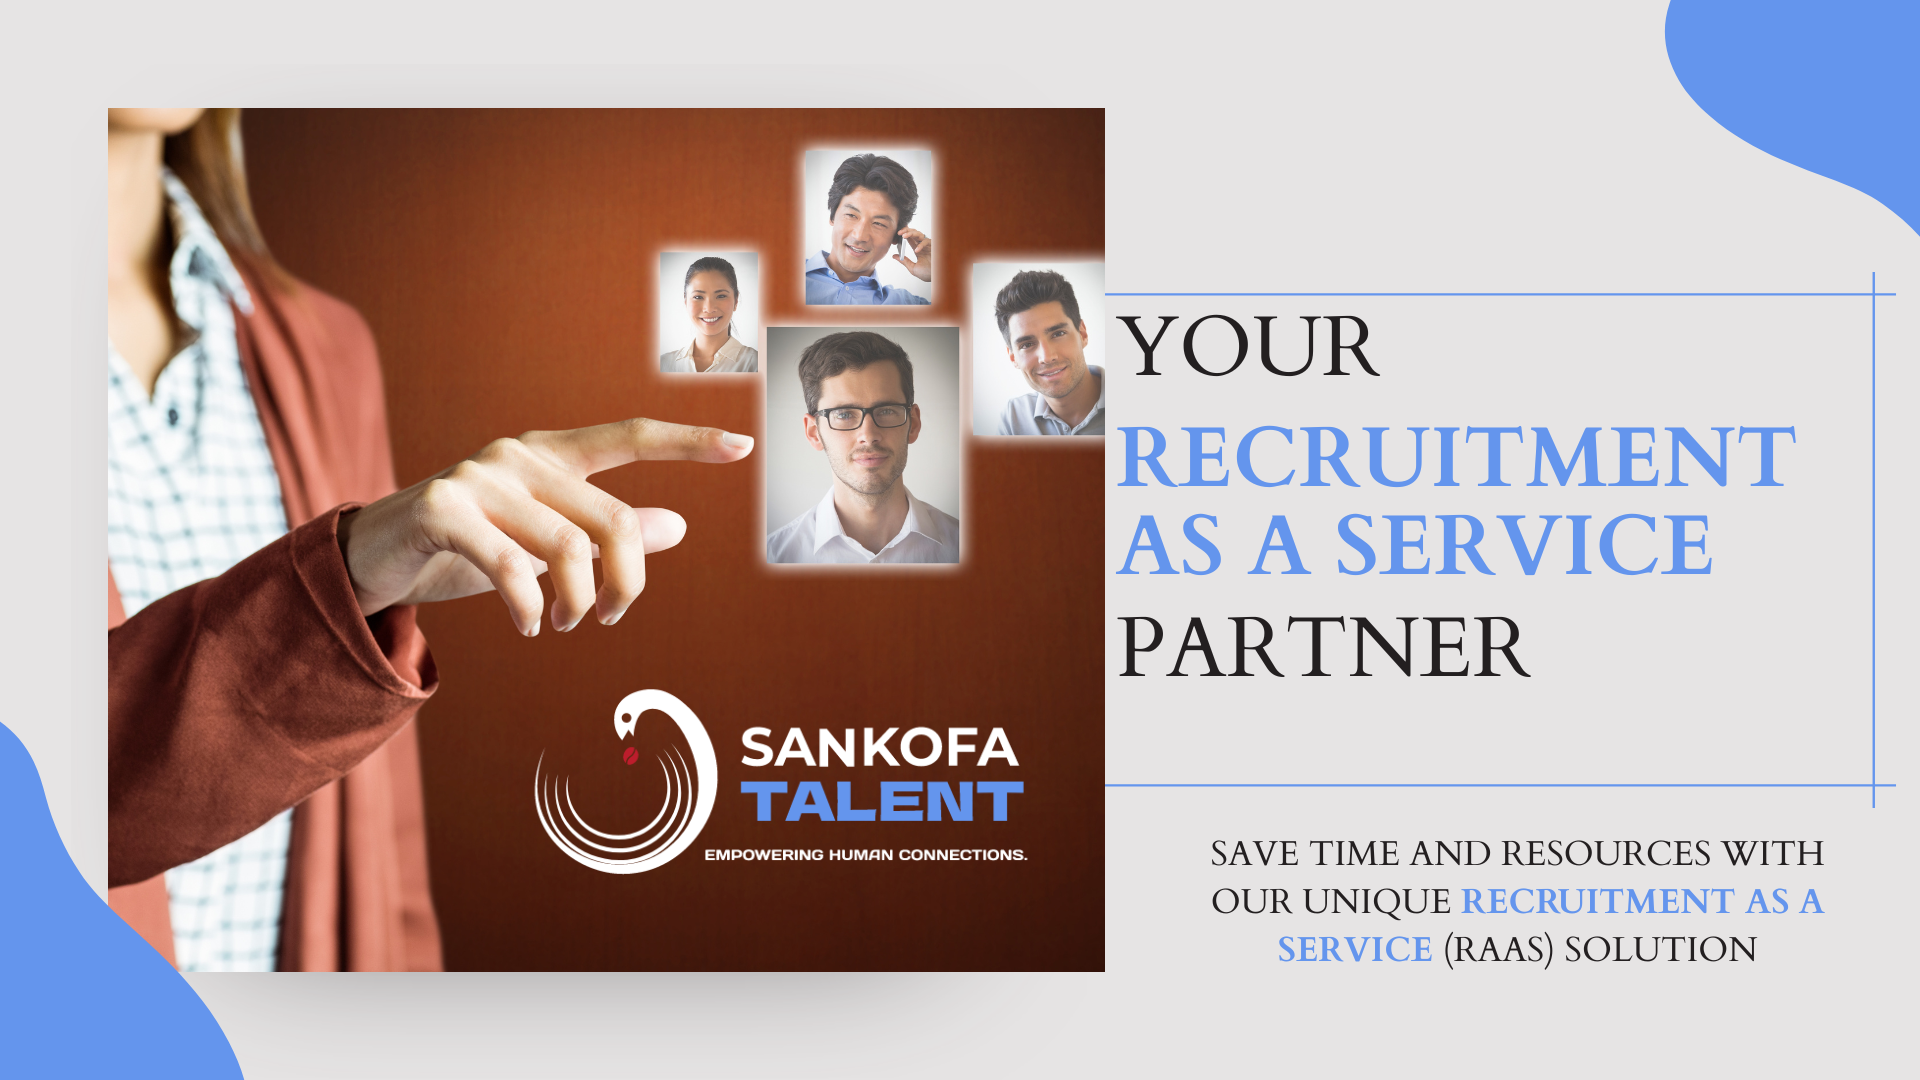 reduce recruitment cost with Sankofa Talent